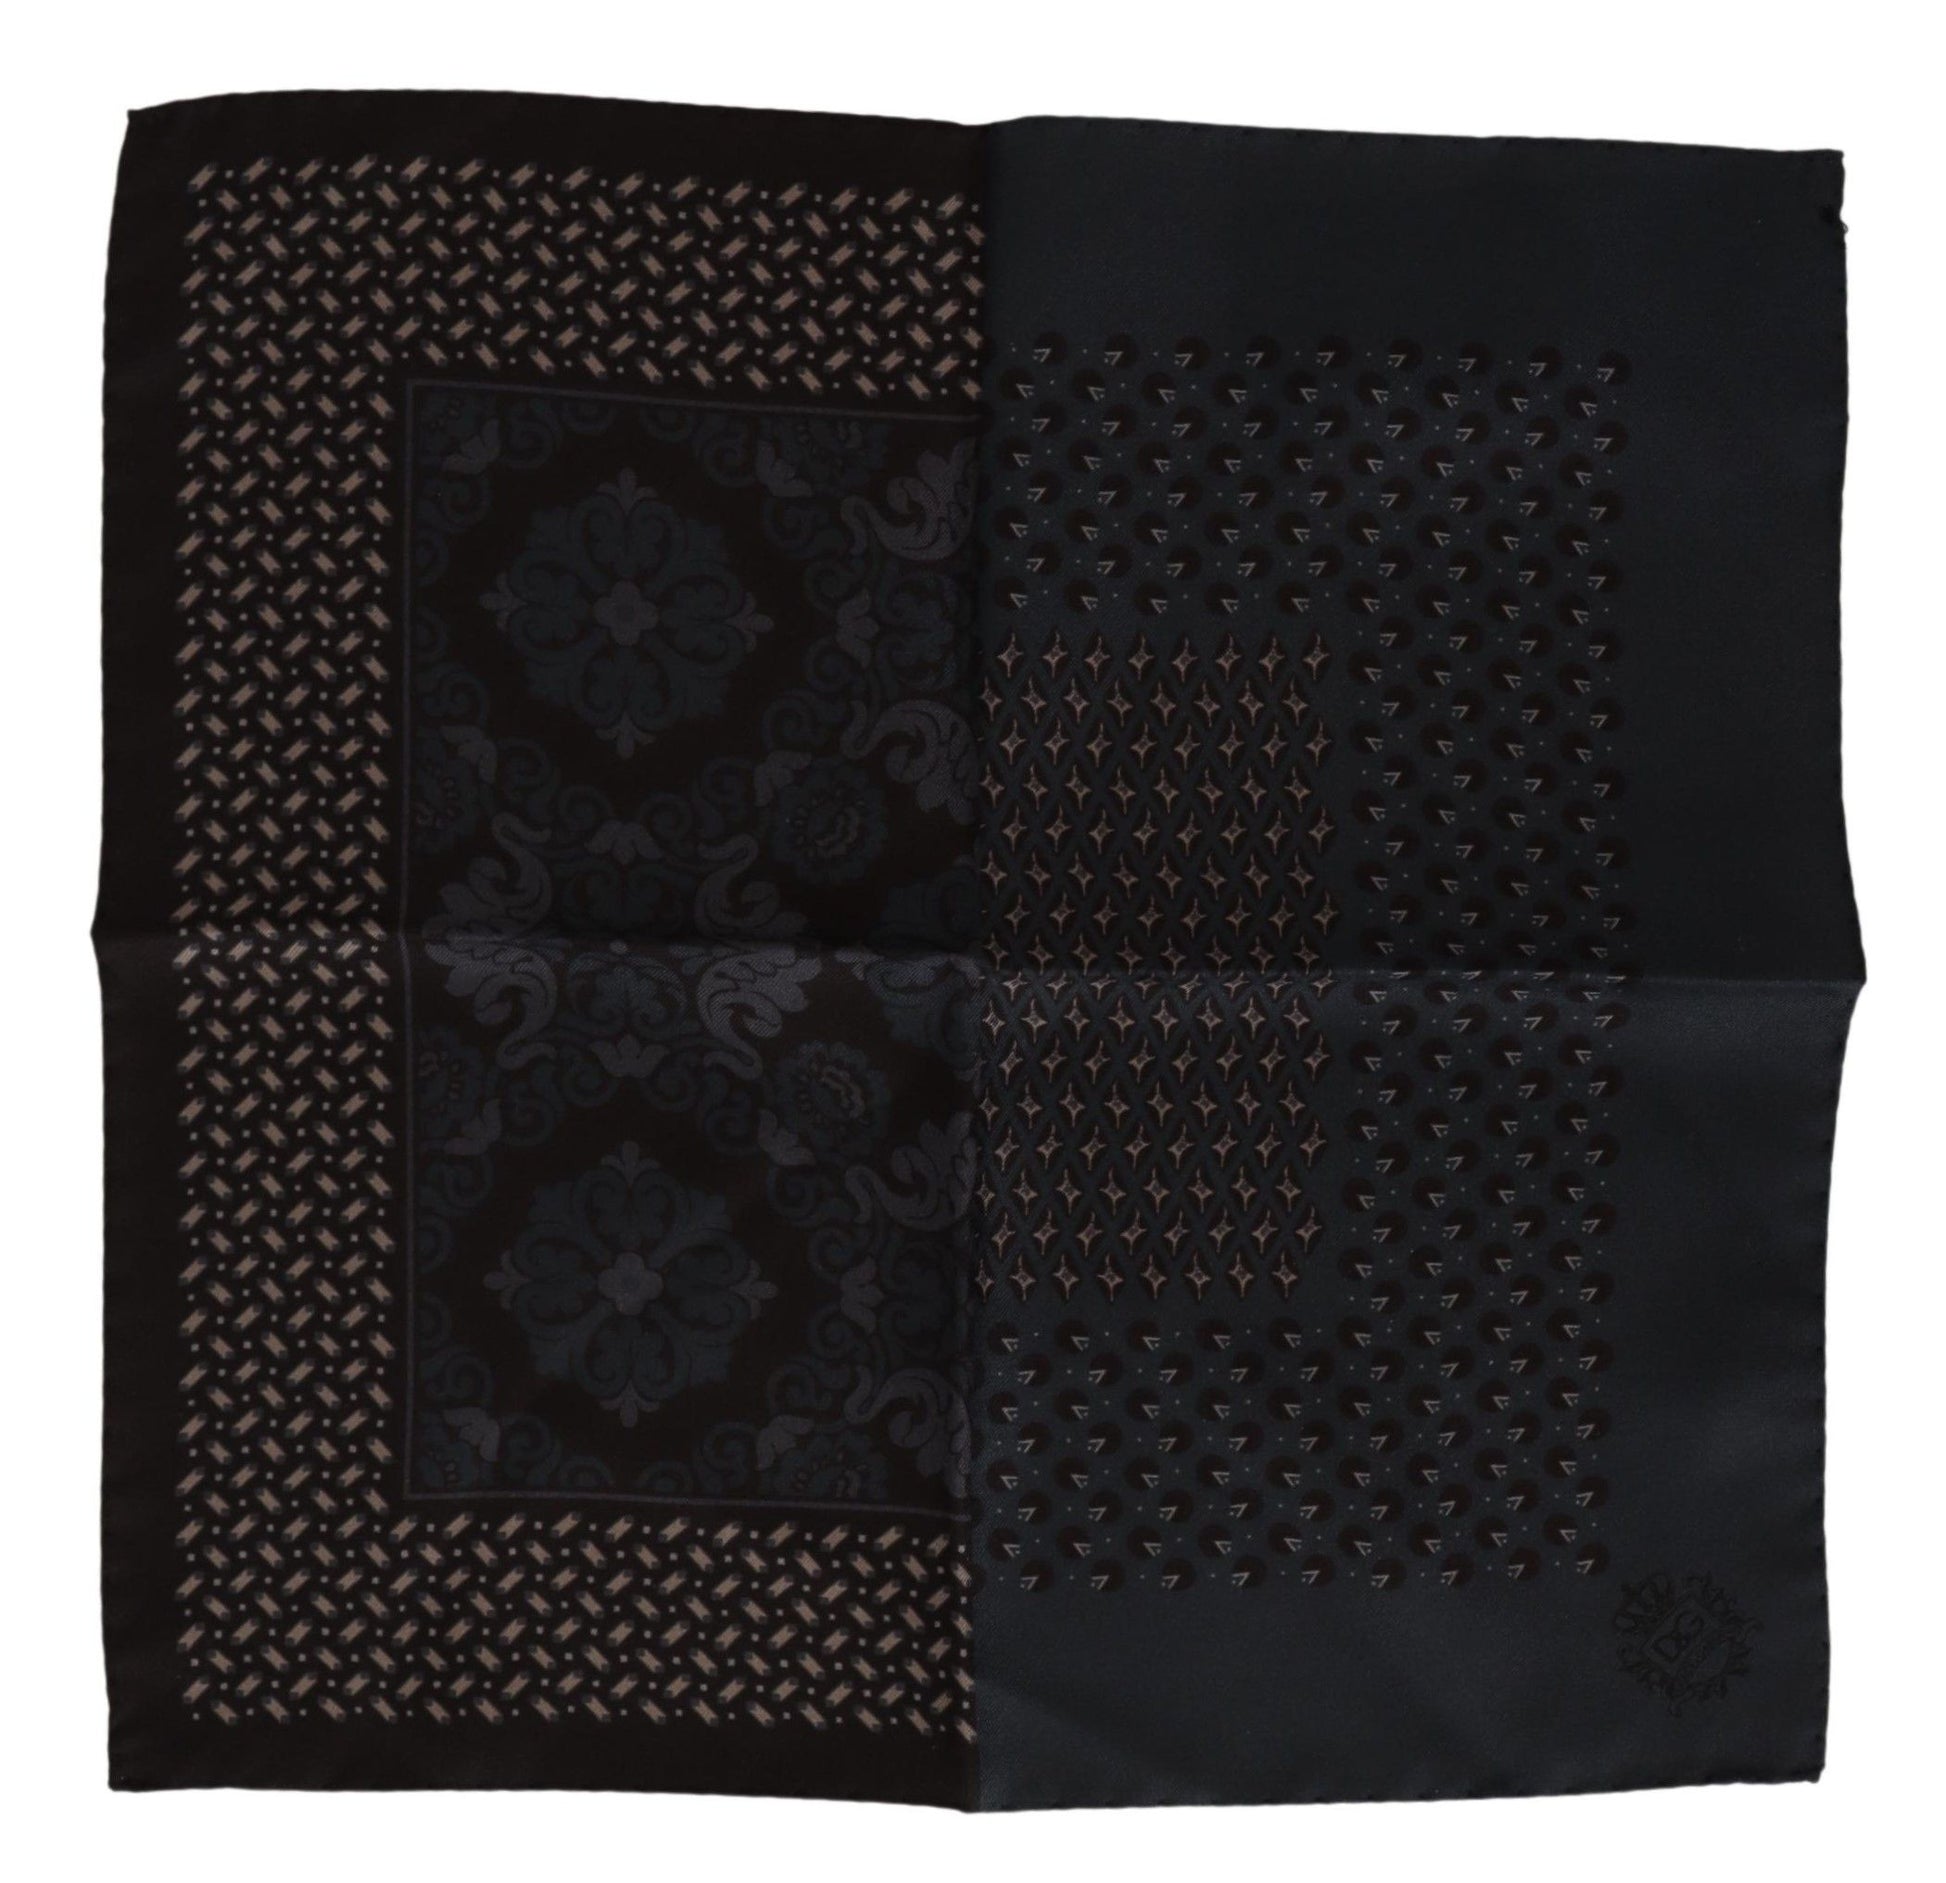 Dolce & Gabbana Multicolor Patterned Silk Pocket Square Handkerchief - Designed by Dolce & Gabbana Available to Buy at a Discounted Price on Moon Behind The Hill Online Designer Discount Stor